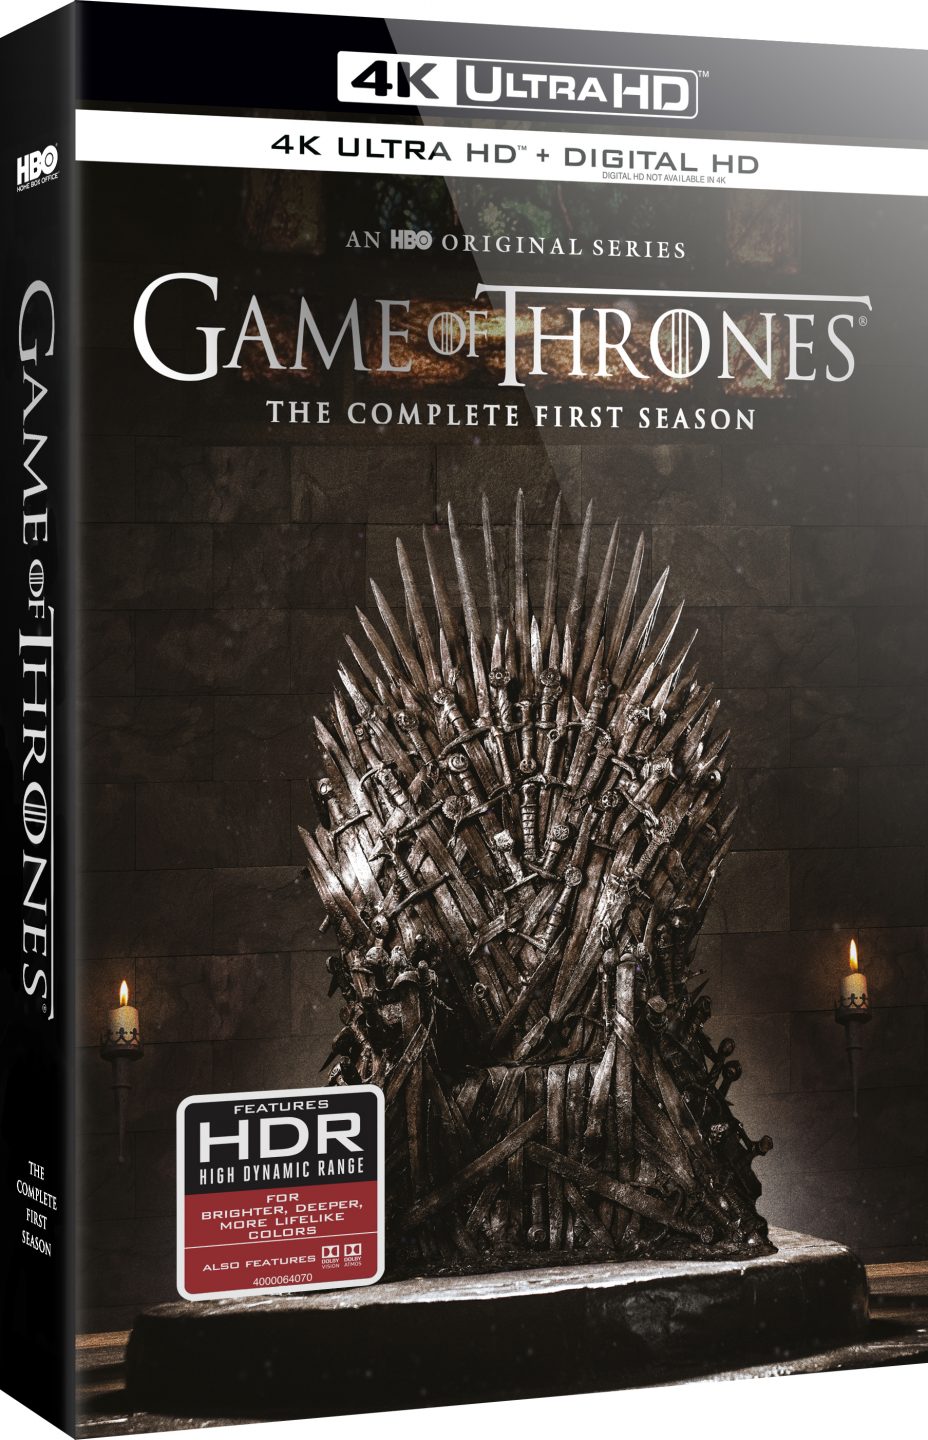 Game Of Thrones Season 1 4K Ultra HD cover (HBO)